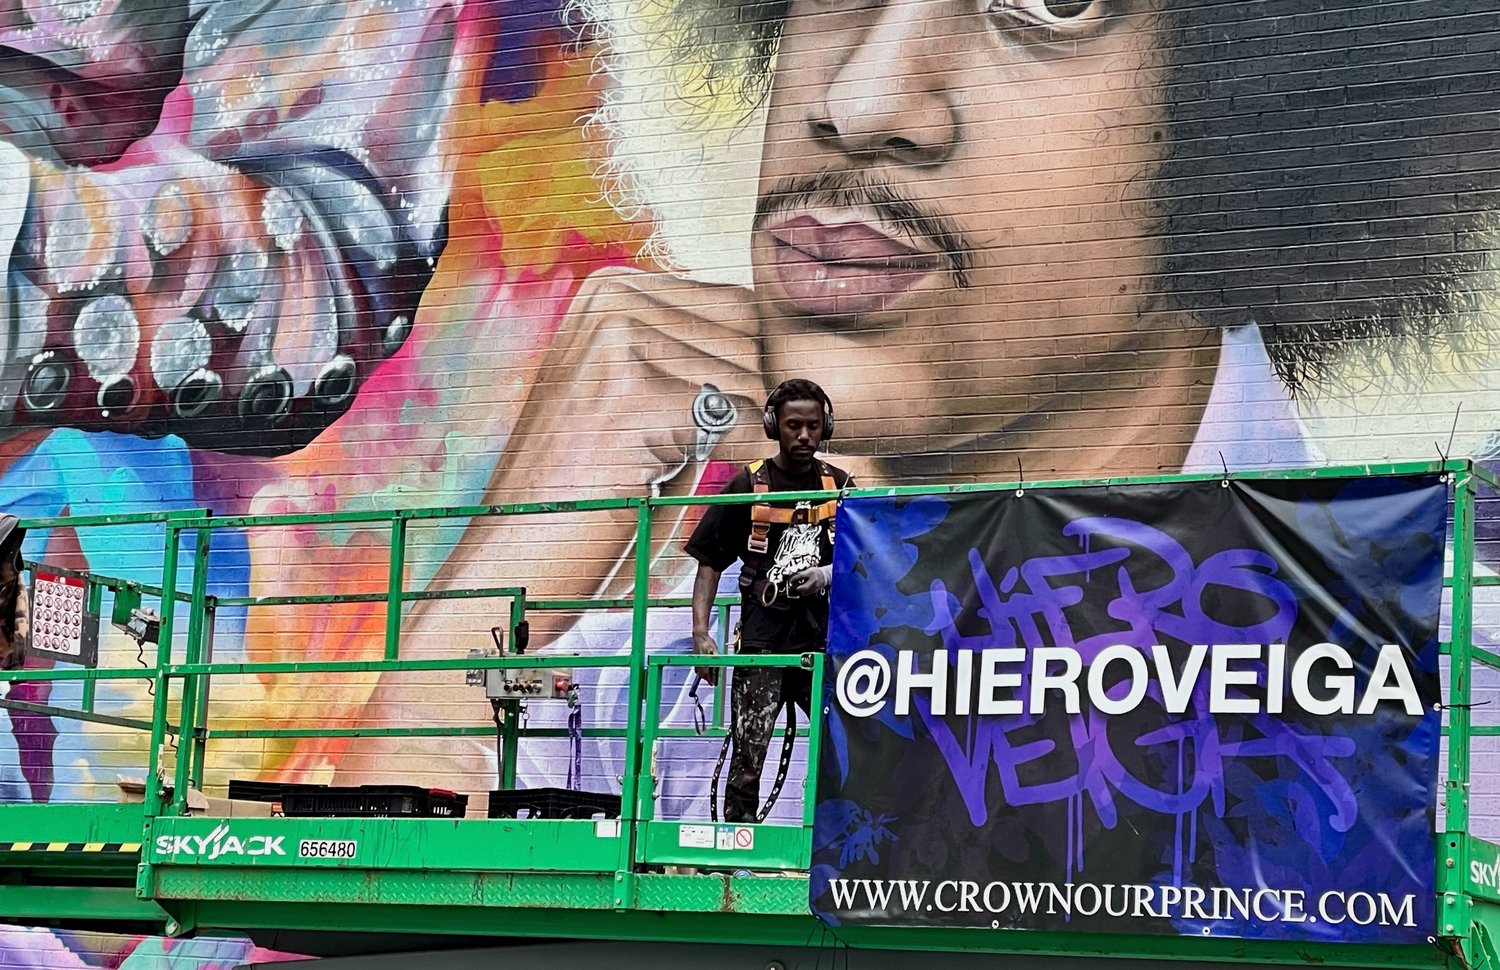 Muralist Hiero applies finishing touches to his masterwork. (Photo by Susan Schaefer)